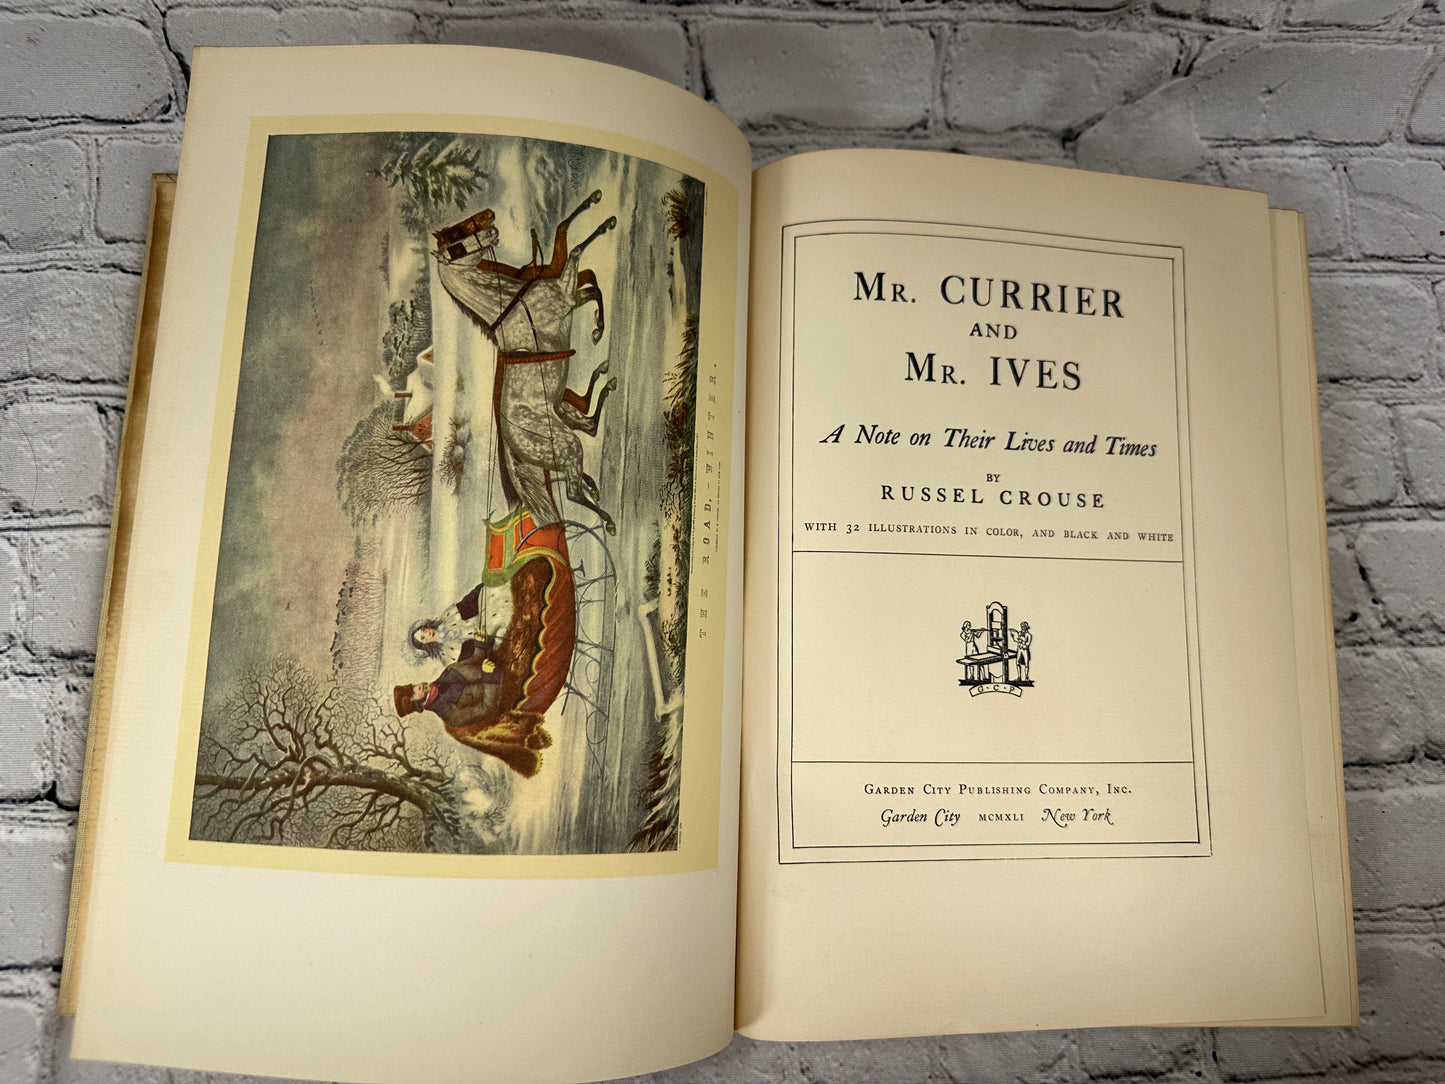 Mr. Currier and Mr. Ives by Russel Crouse [1930]